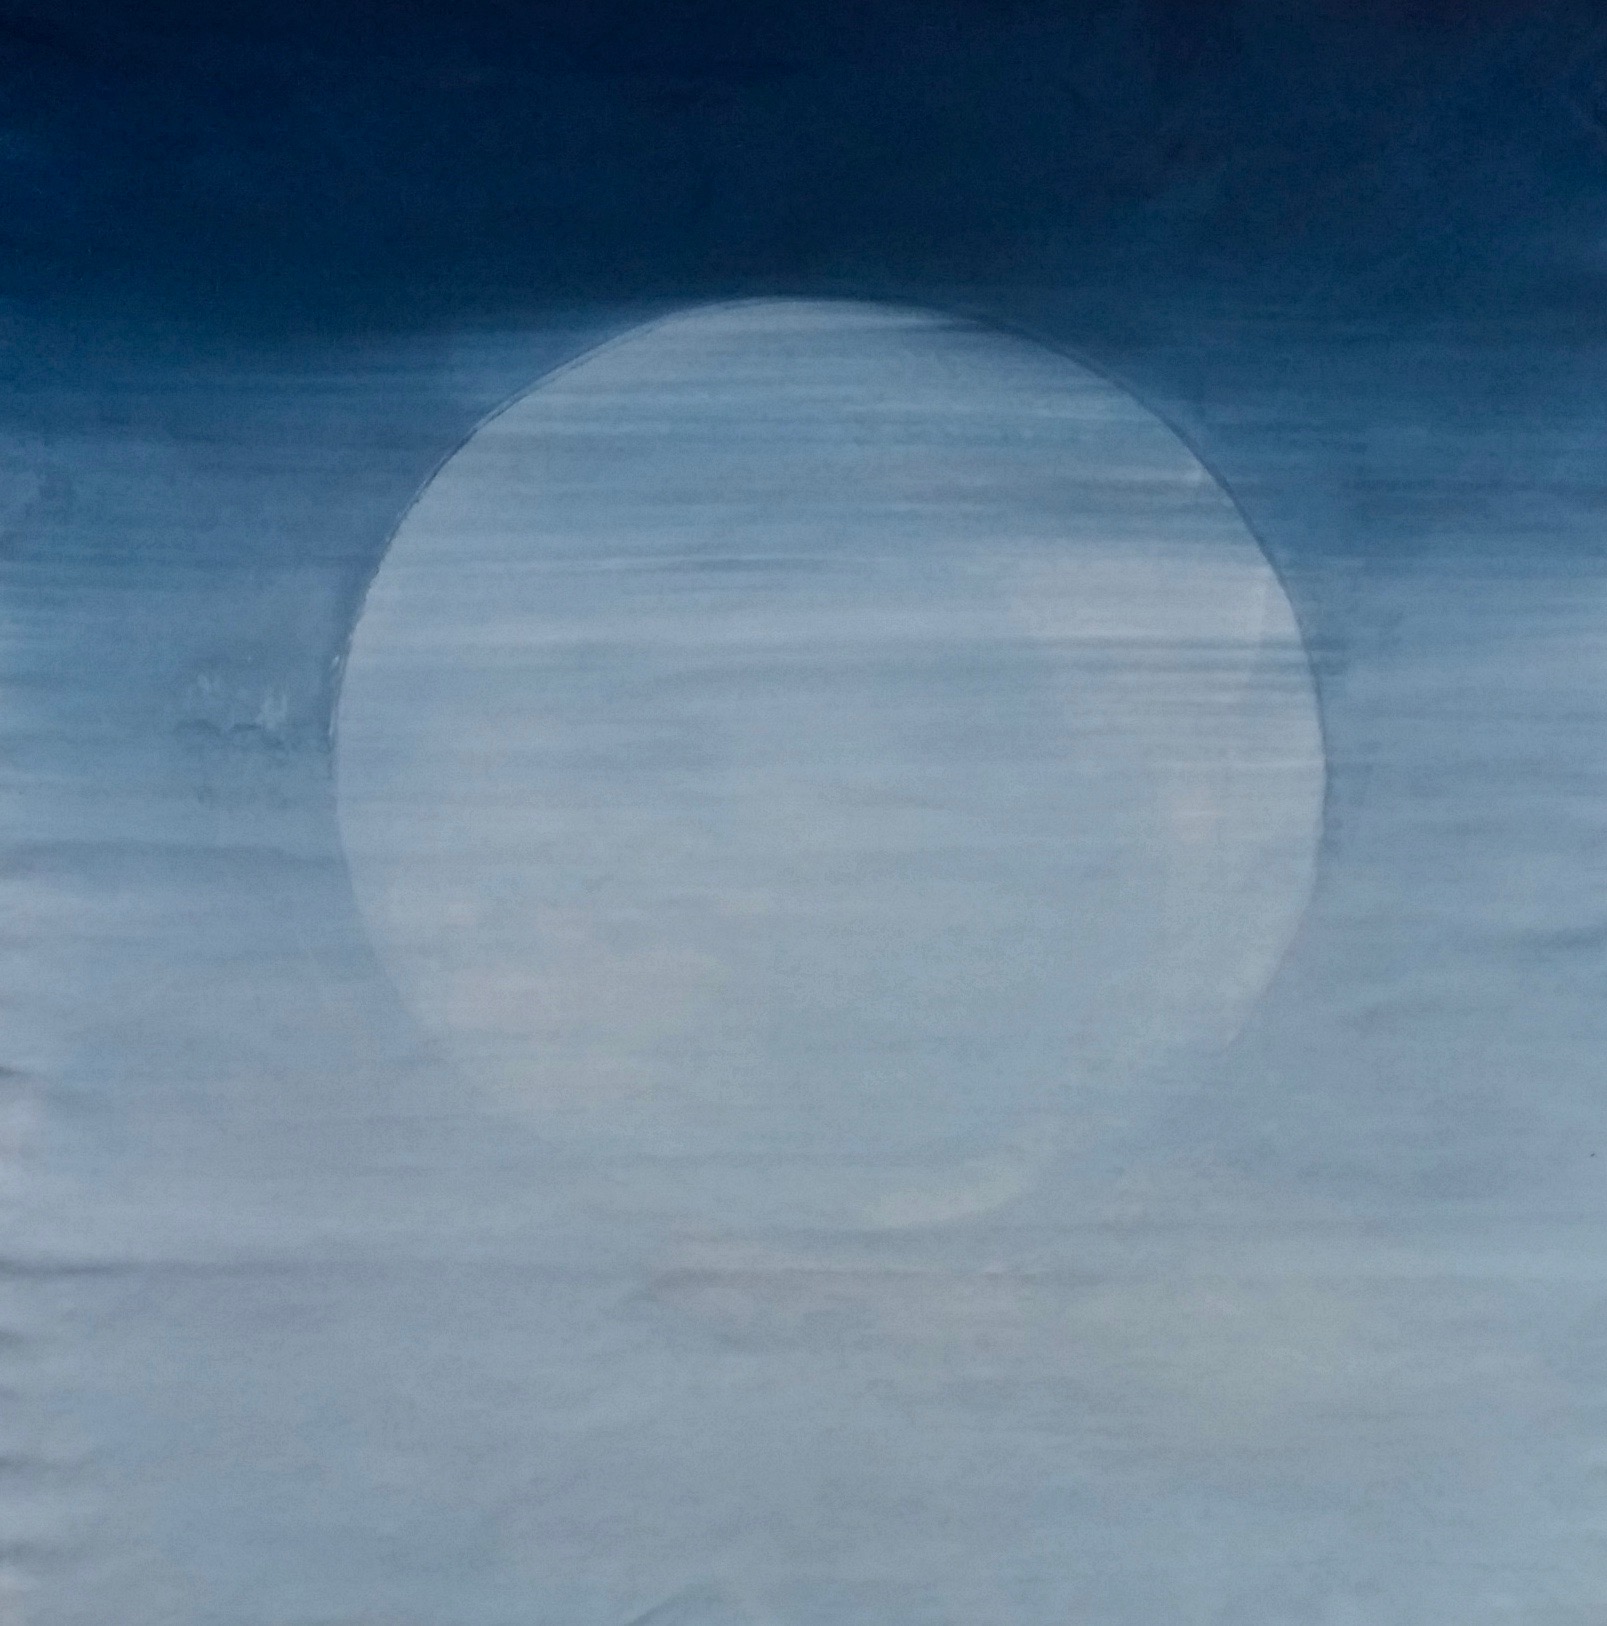  Lunar View, 2018 65 x 61 inches Acrylic on unstretched canvas 